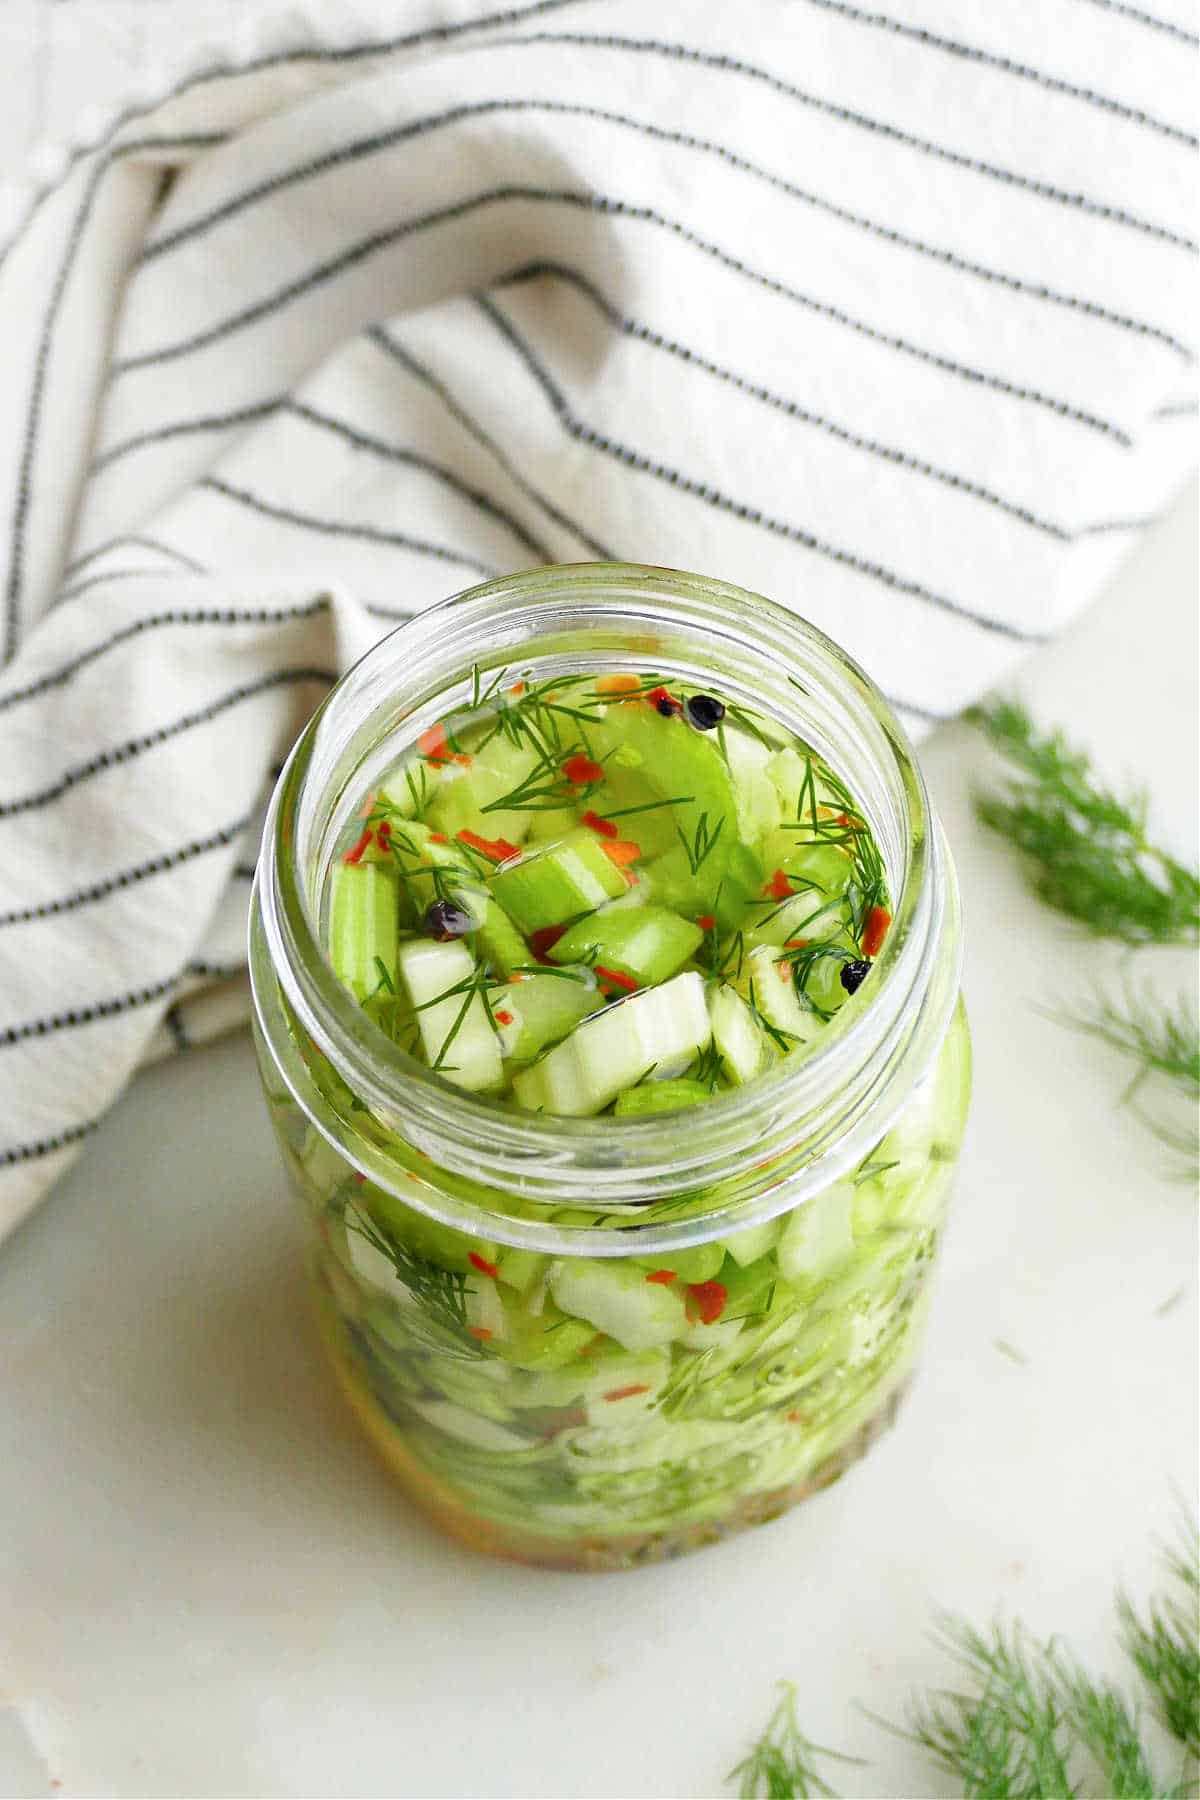 pickled celery in a jar next to a striped napkin and fresh dill